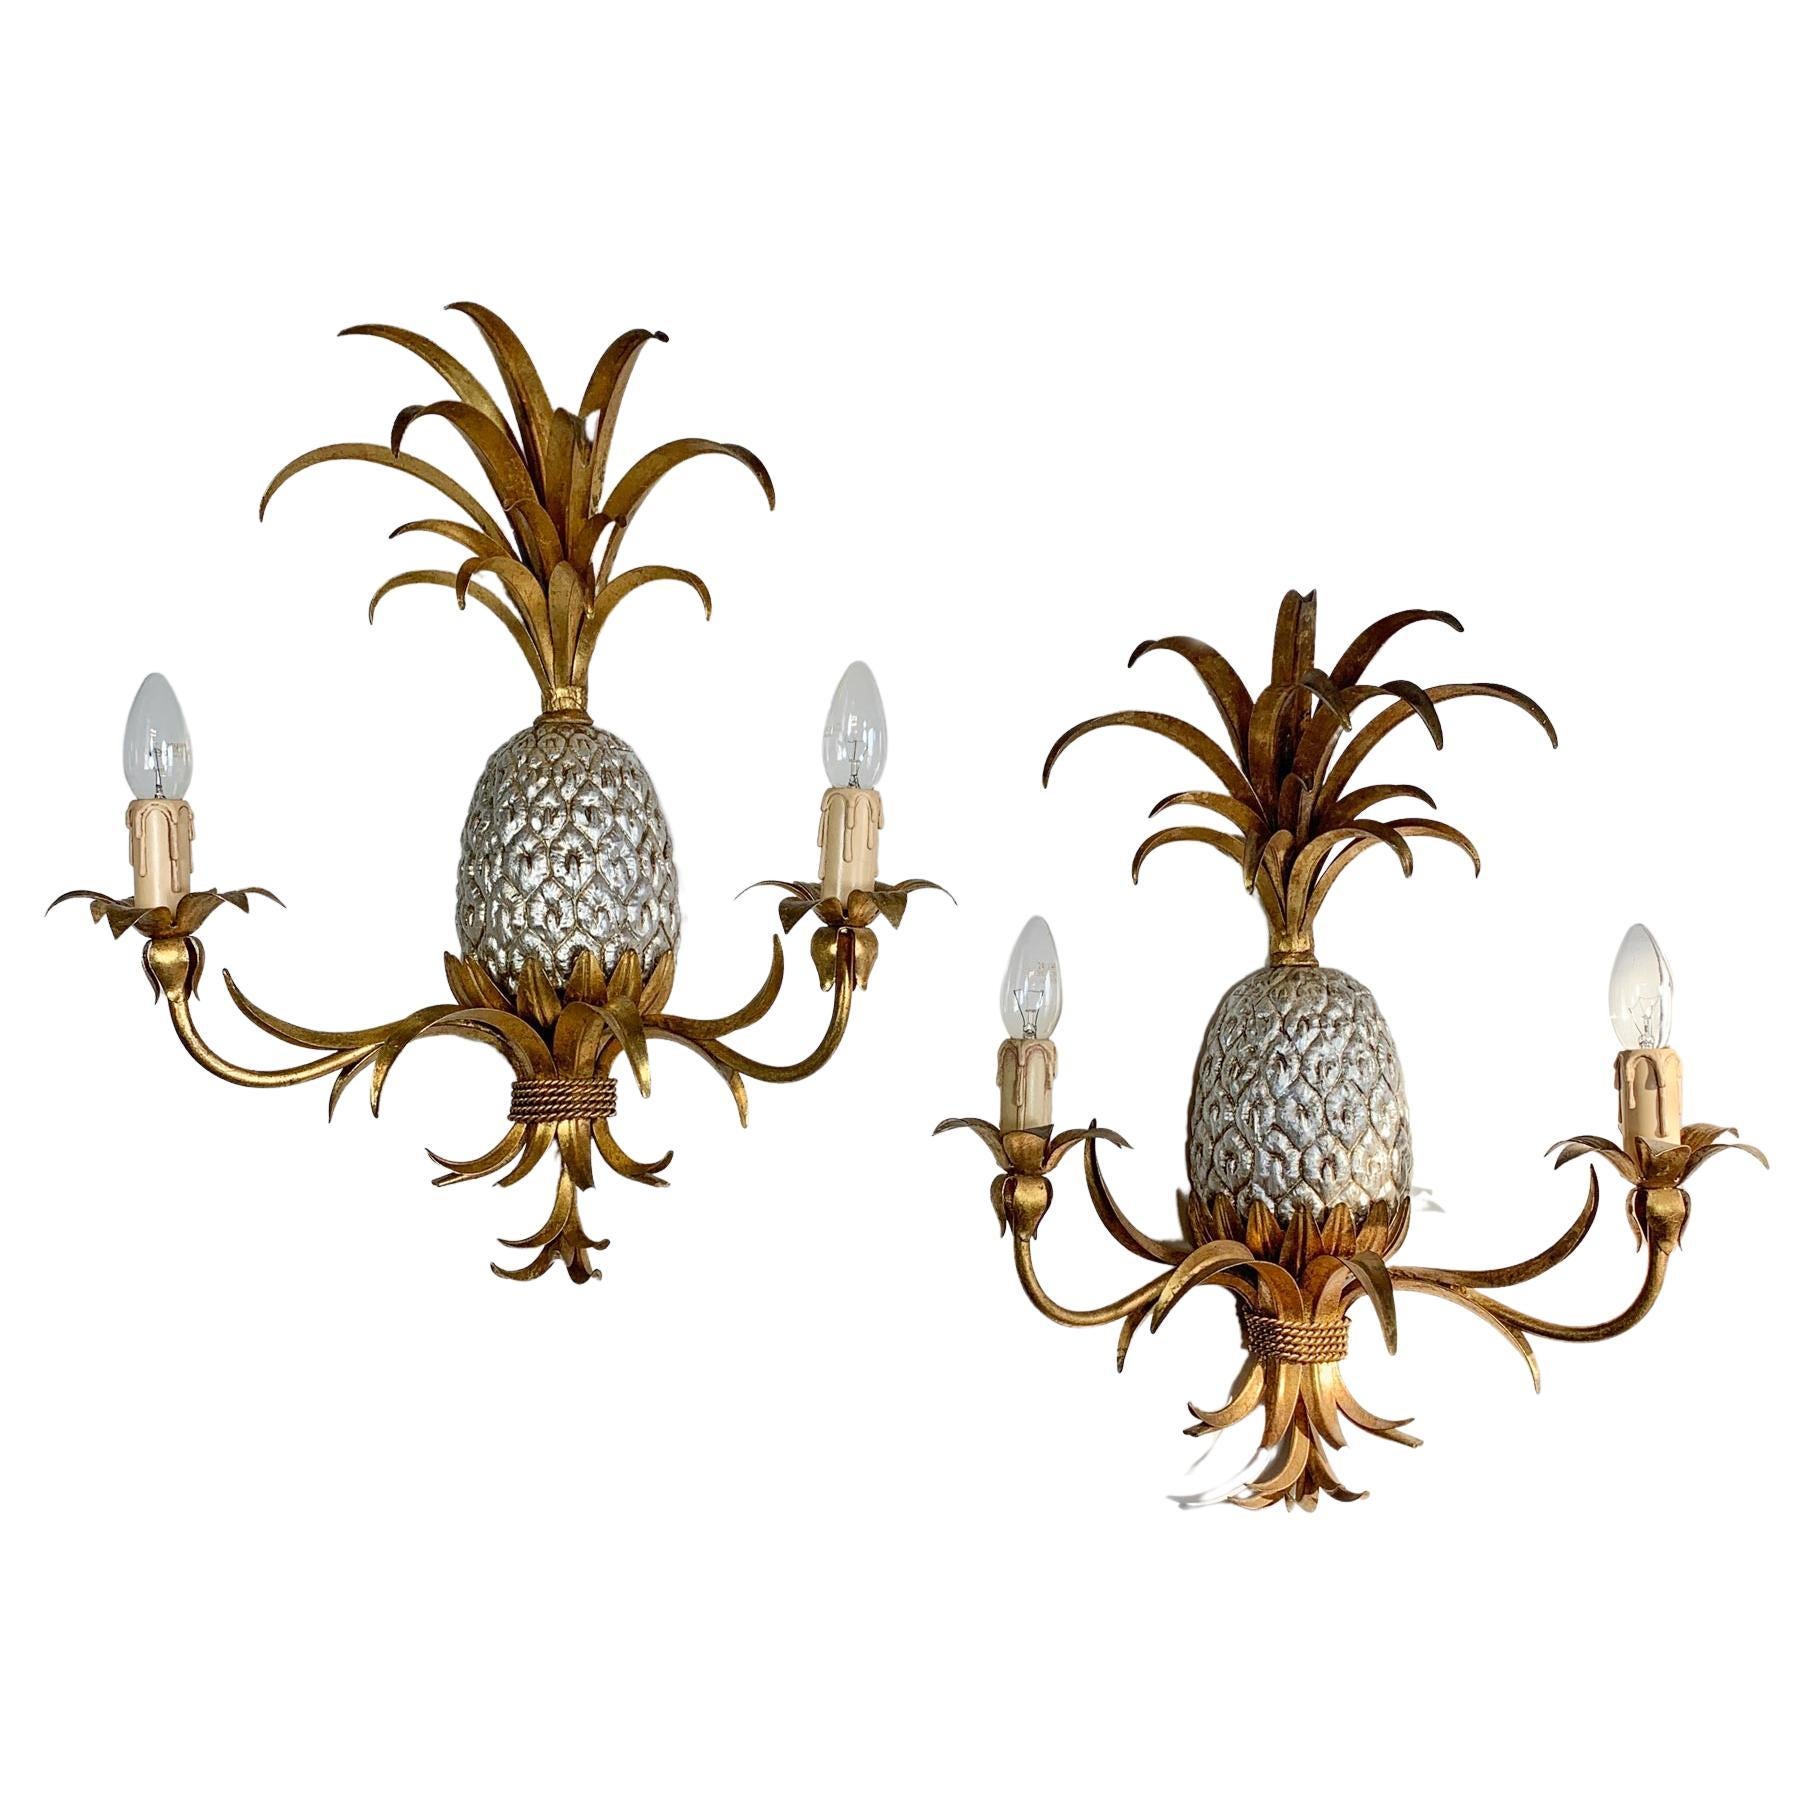 Pair of Maison Charles Gilt Silver Pineapple Wall Lights